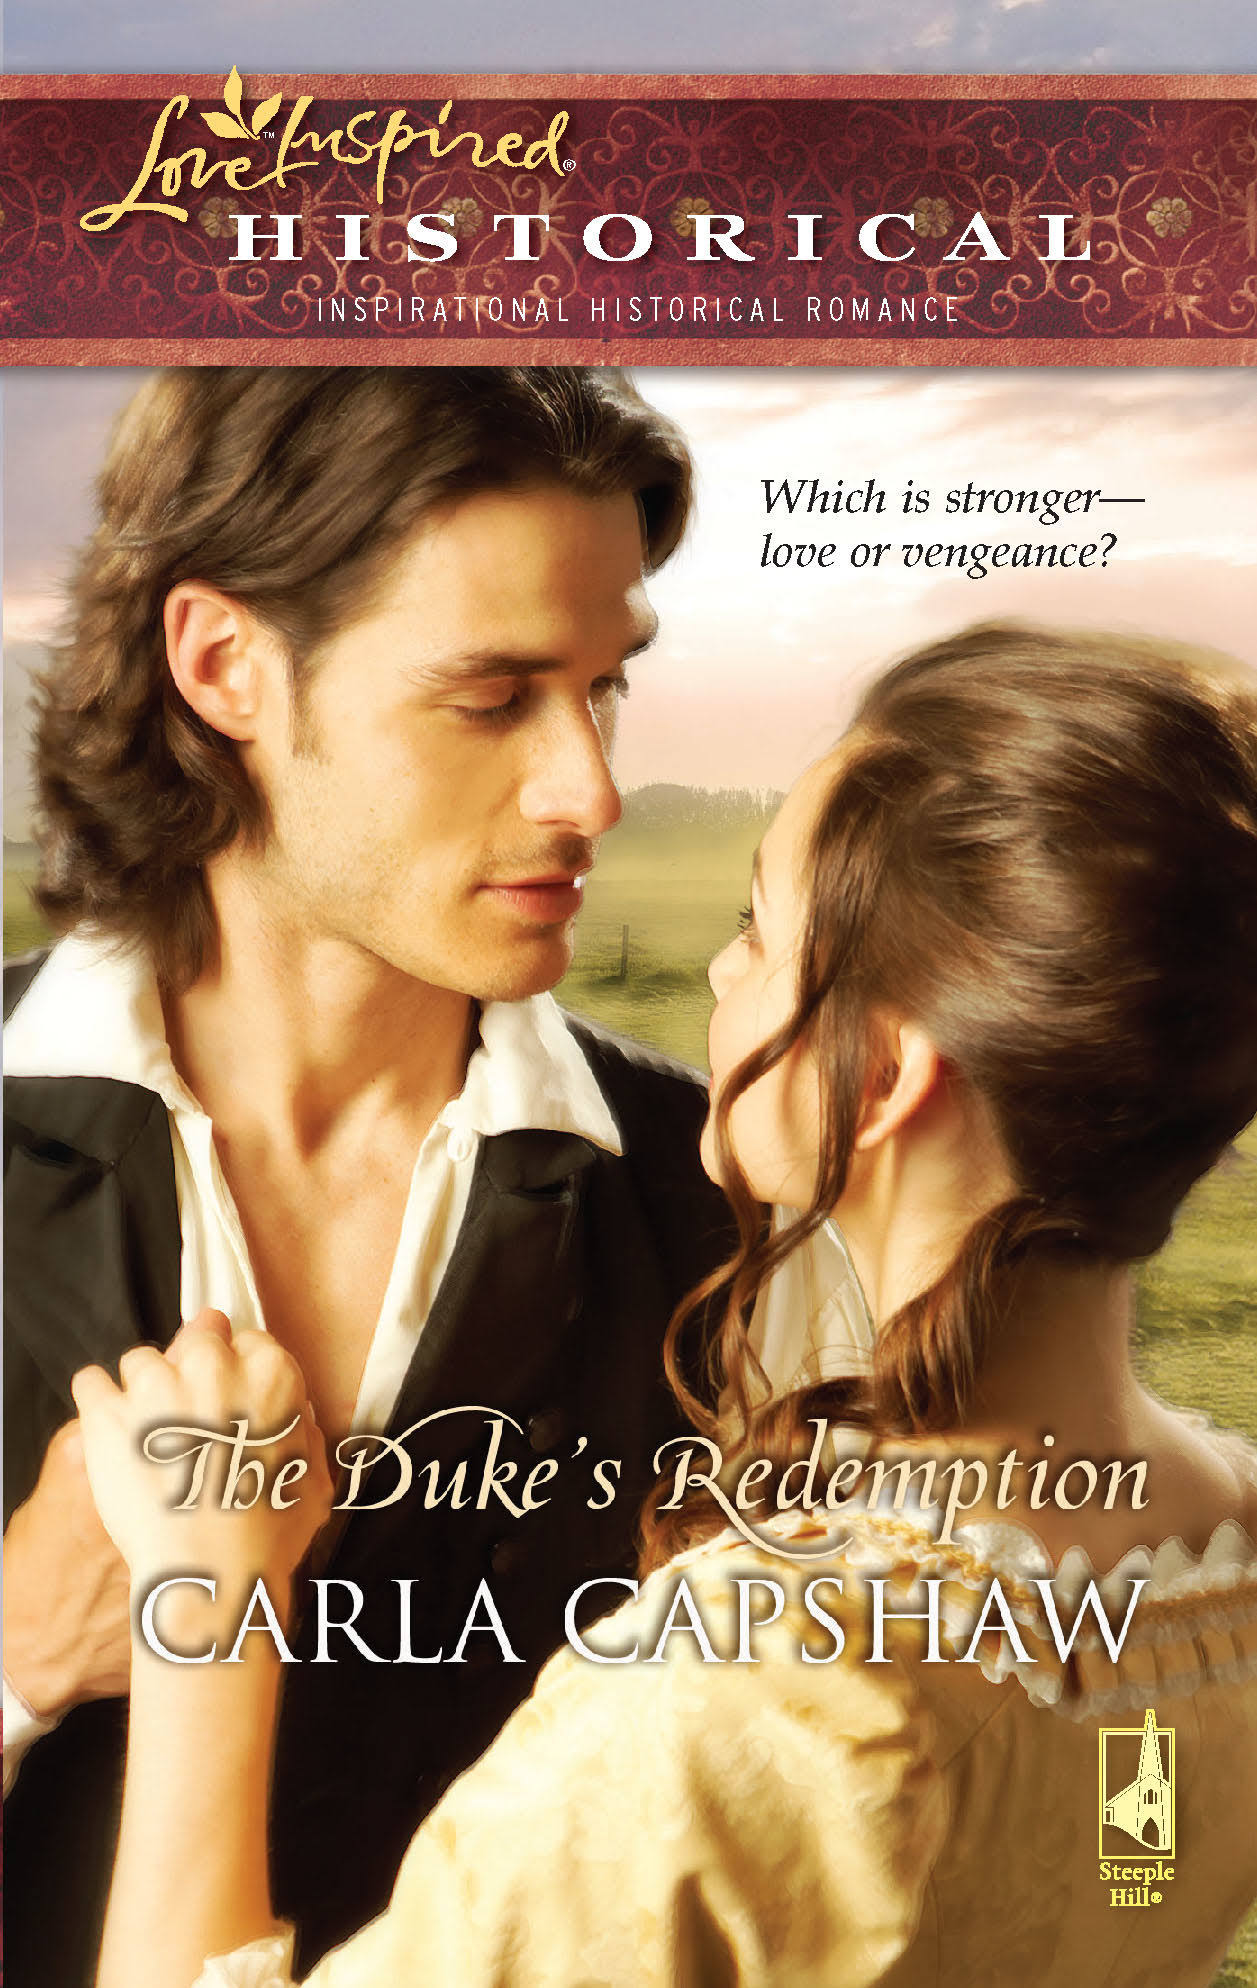 The Duke's Redemption by Capshaw, Carla - 0373828284 by Love Inspired Historical | Thriftbooks.com